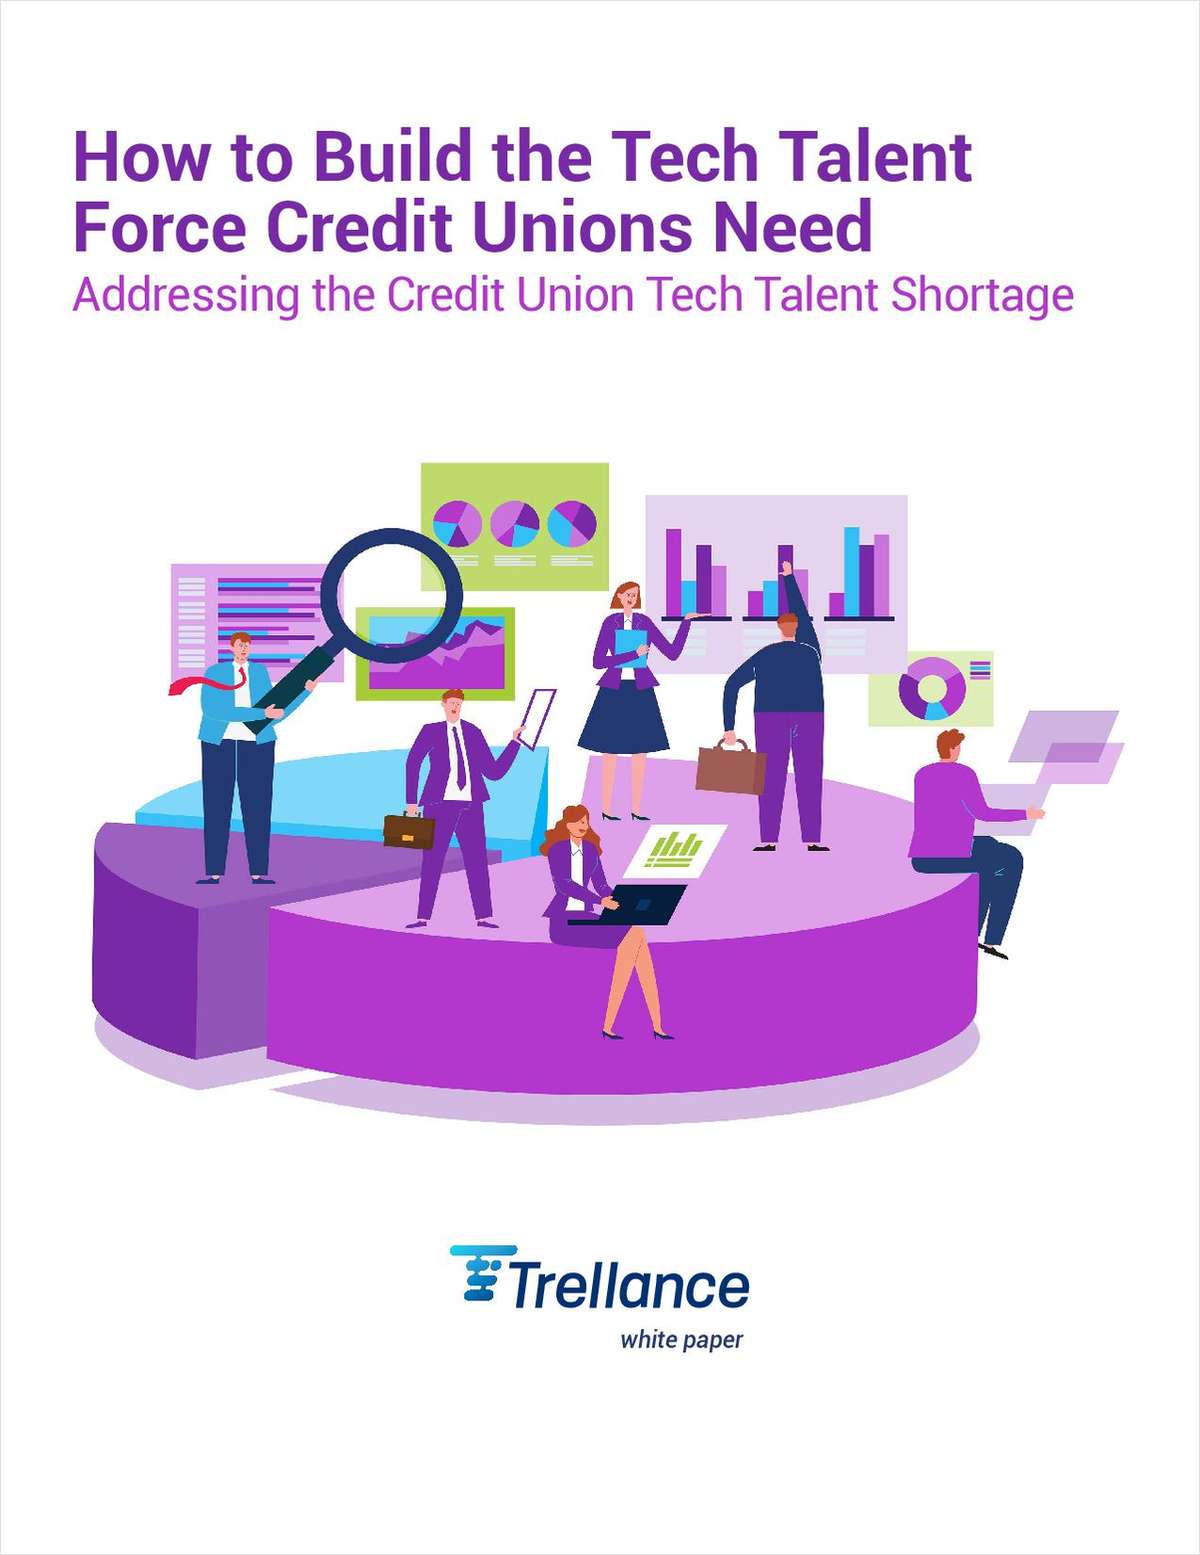 How to Build the Tech Talent Force Credit Unions Need: Addressing the Credit Union Tech Talent Shortage link